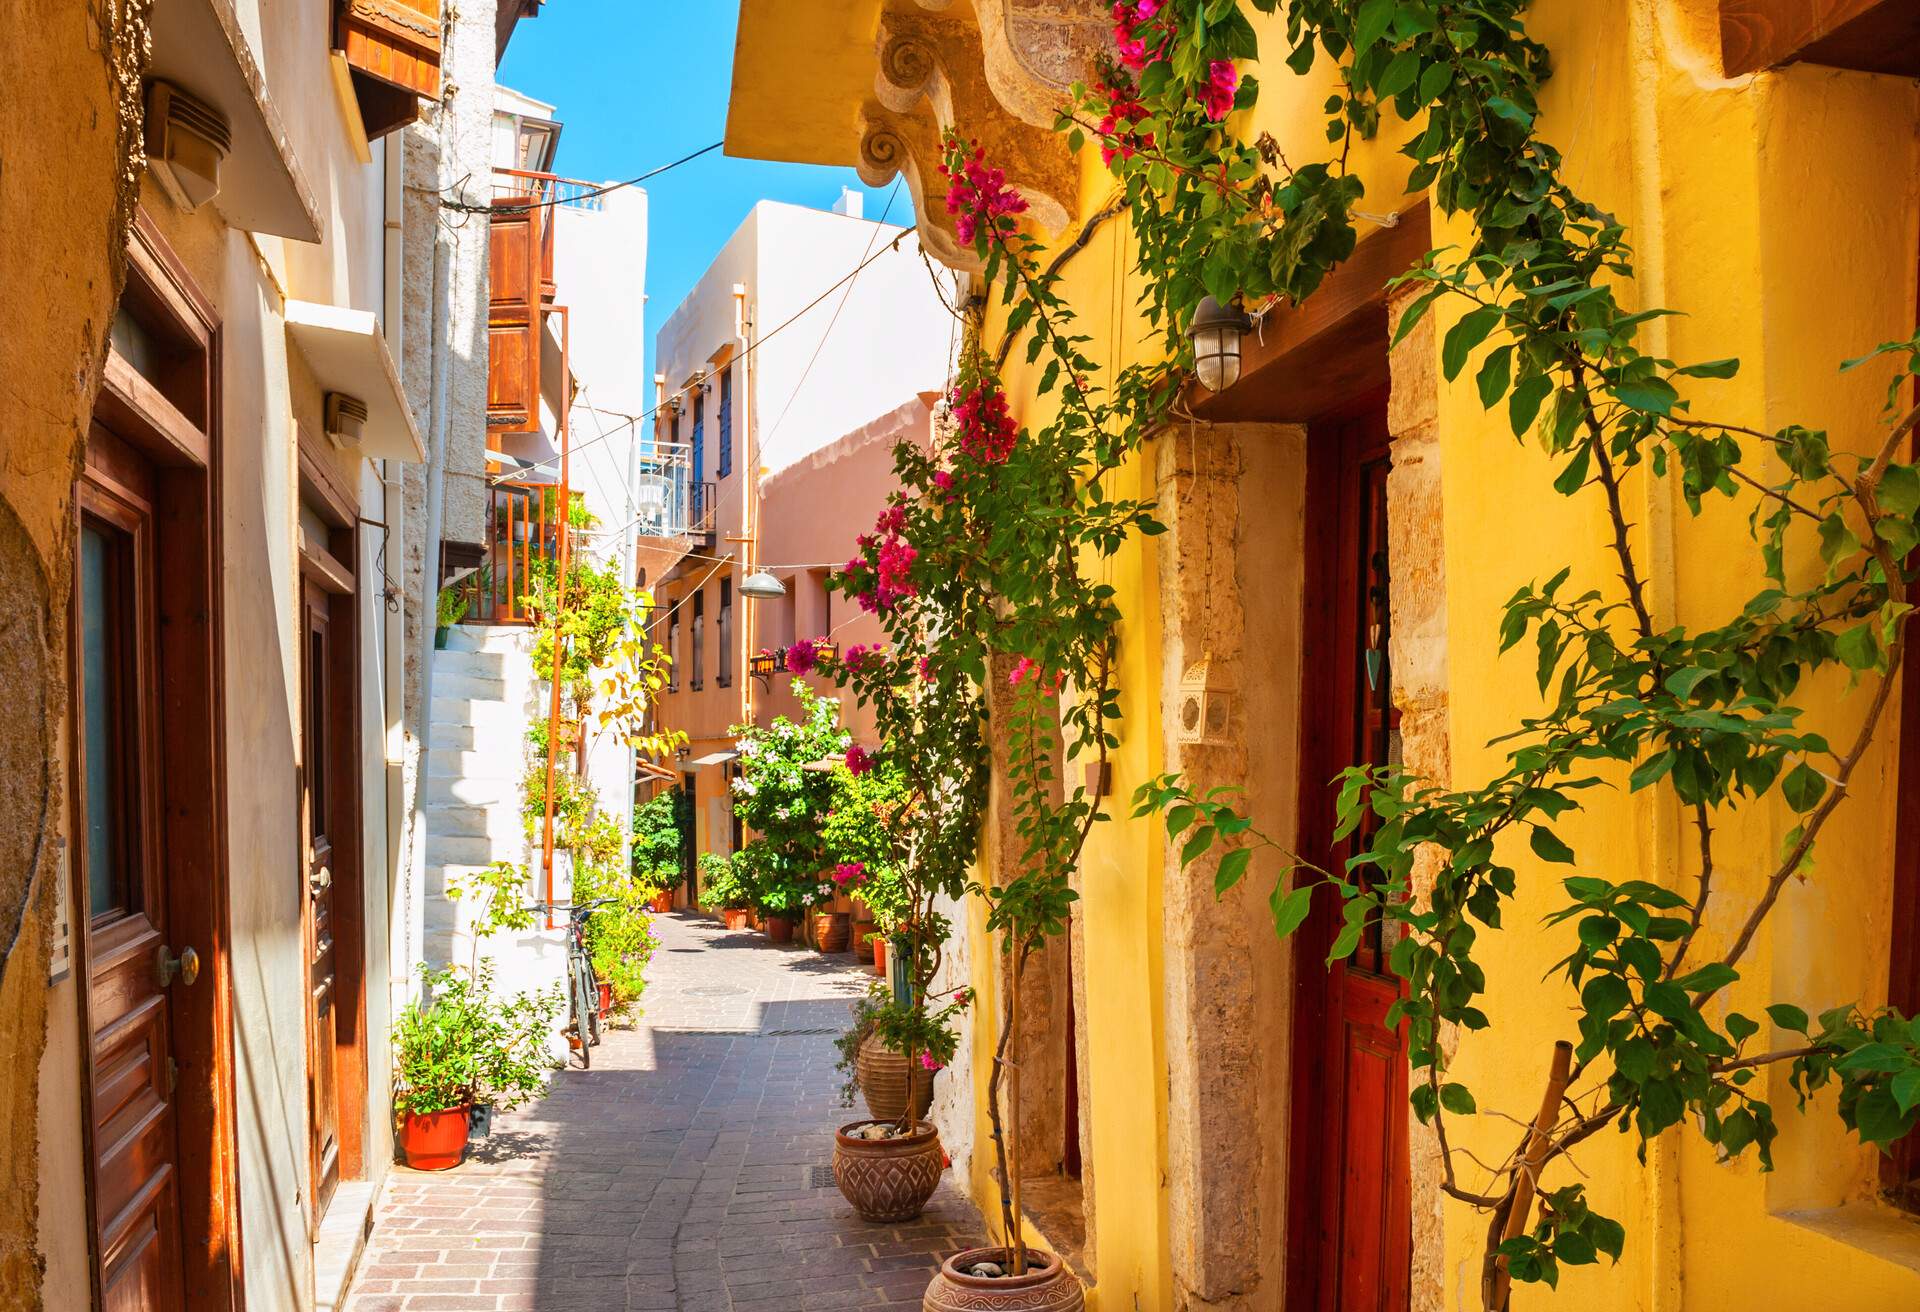 Beautiful street with colorful buildings in Chania, Crete island, Greece. Summer landscape